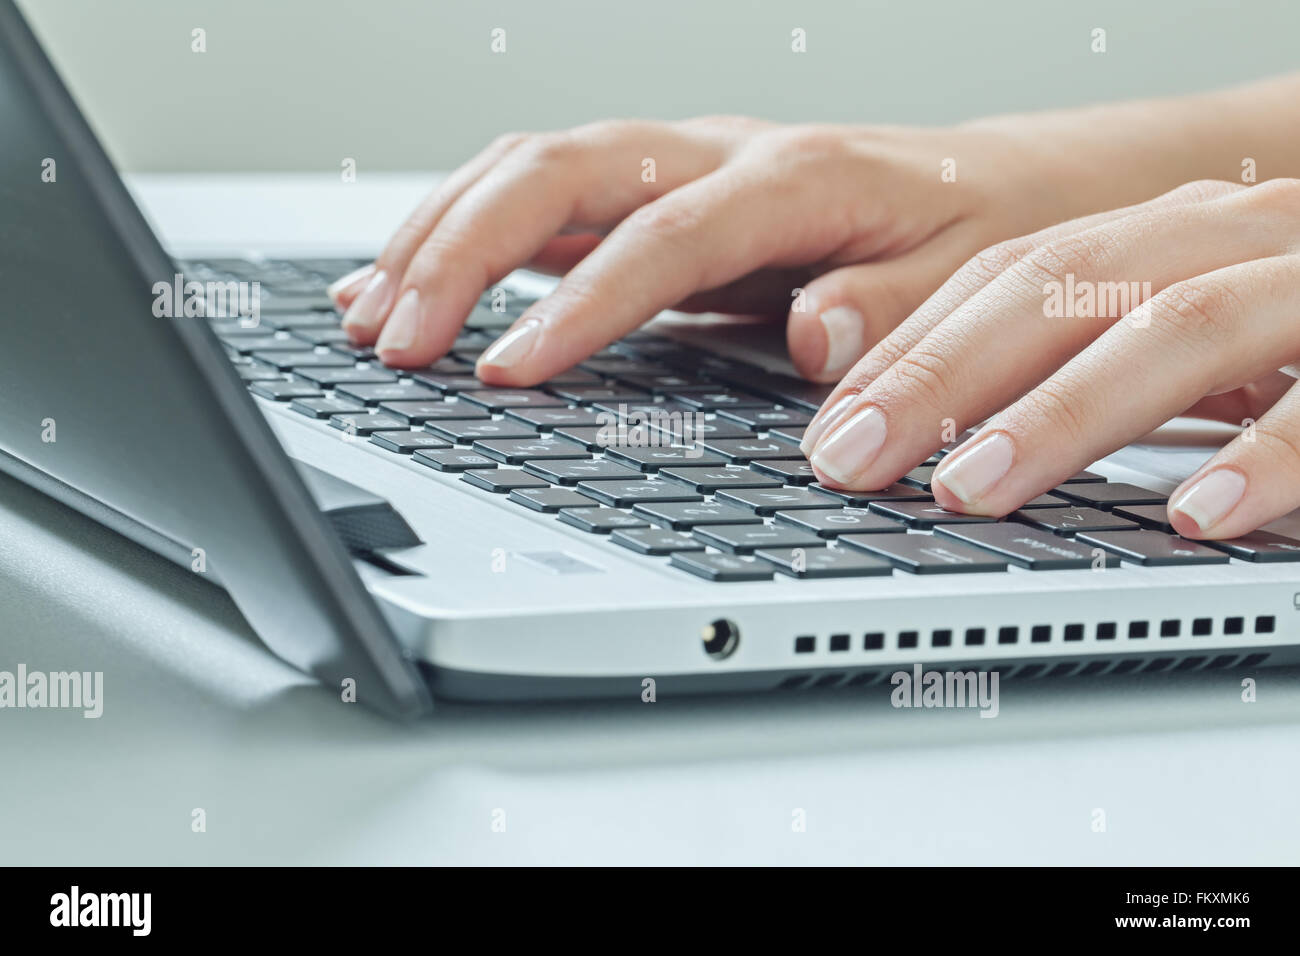 Macro photo of female hands typing on laptop. businesswoman working at office computer. Stock Photo